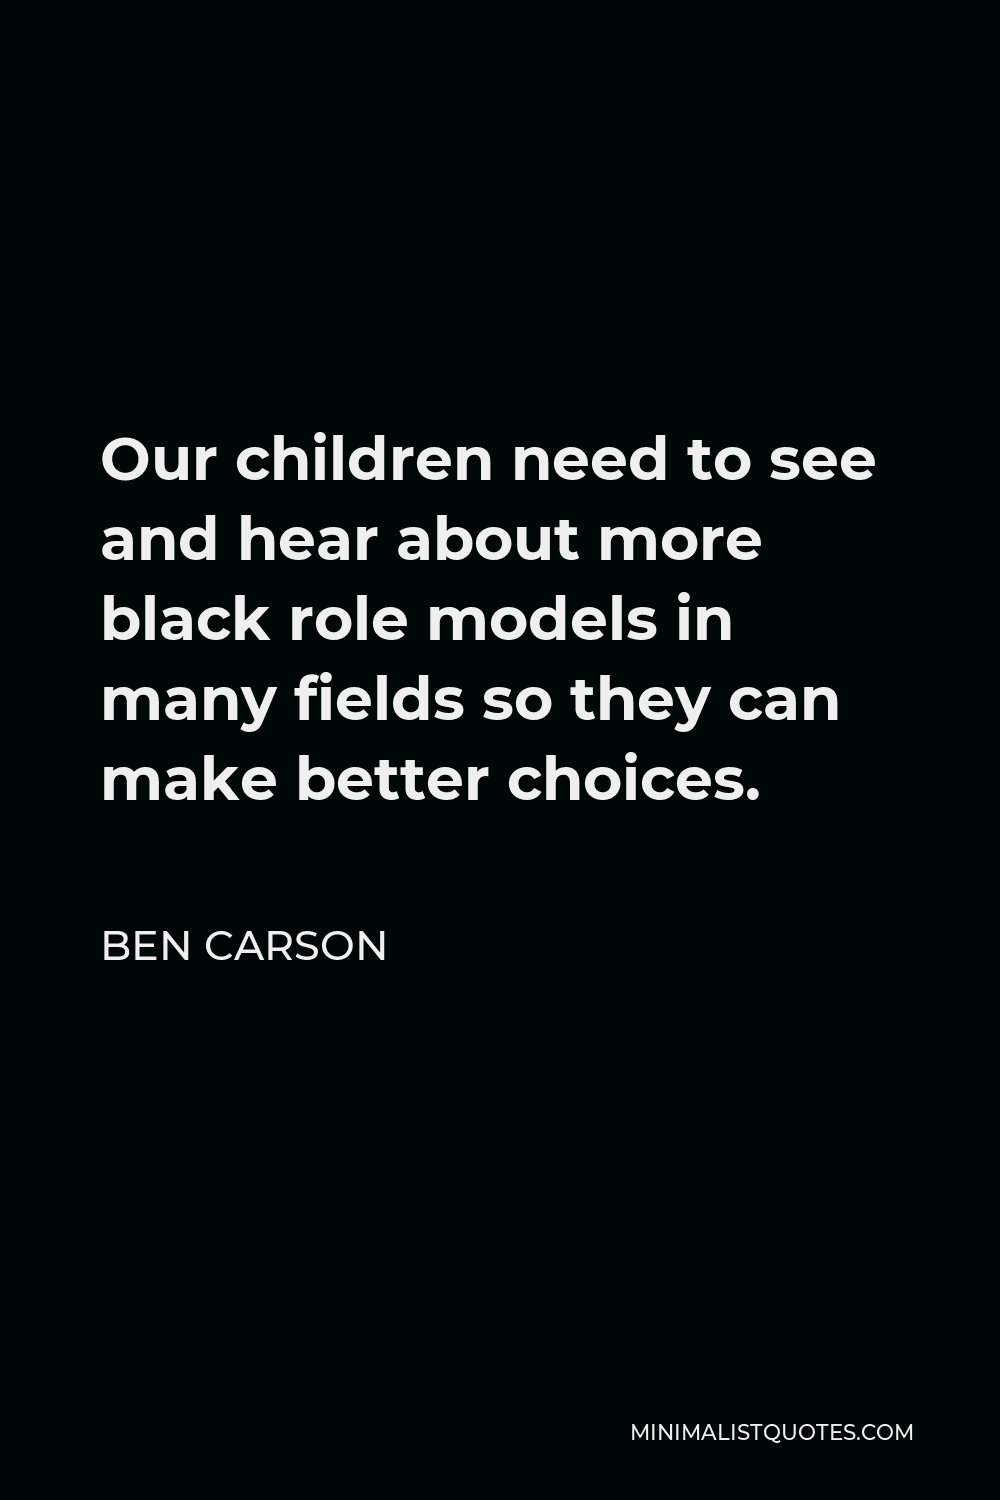 Ben Carson Quote - Our children need to see and hear about more black role models in many fields so they can make better choices.